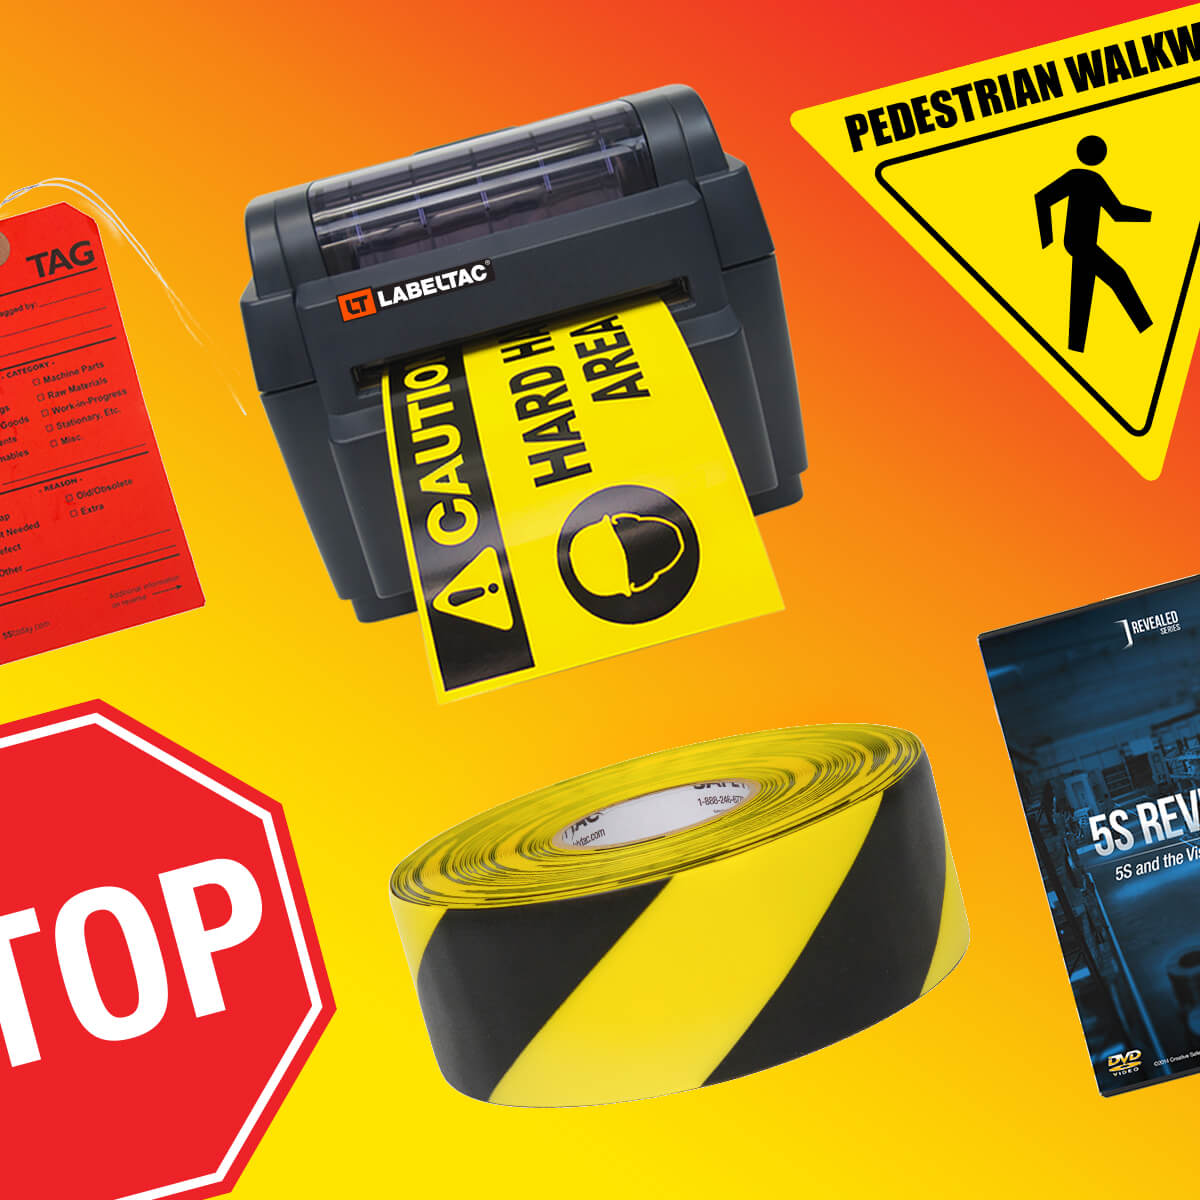 Creative Safety Supply - Industrial Label Printers, Floor Marking Tape,  Safety Signs & Supplies